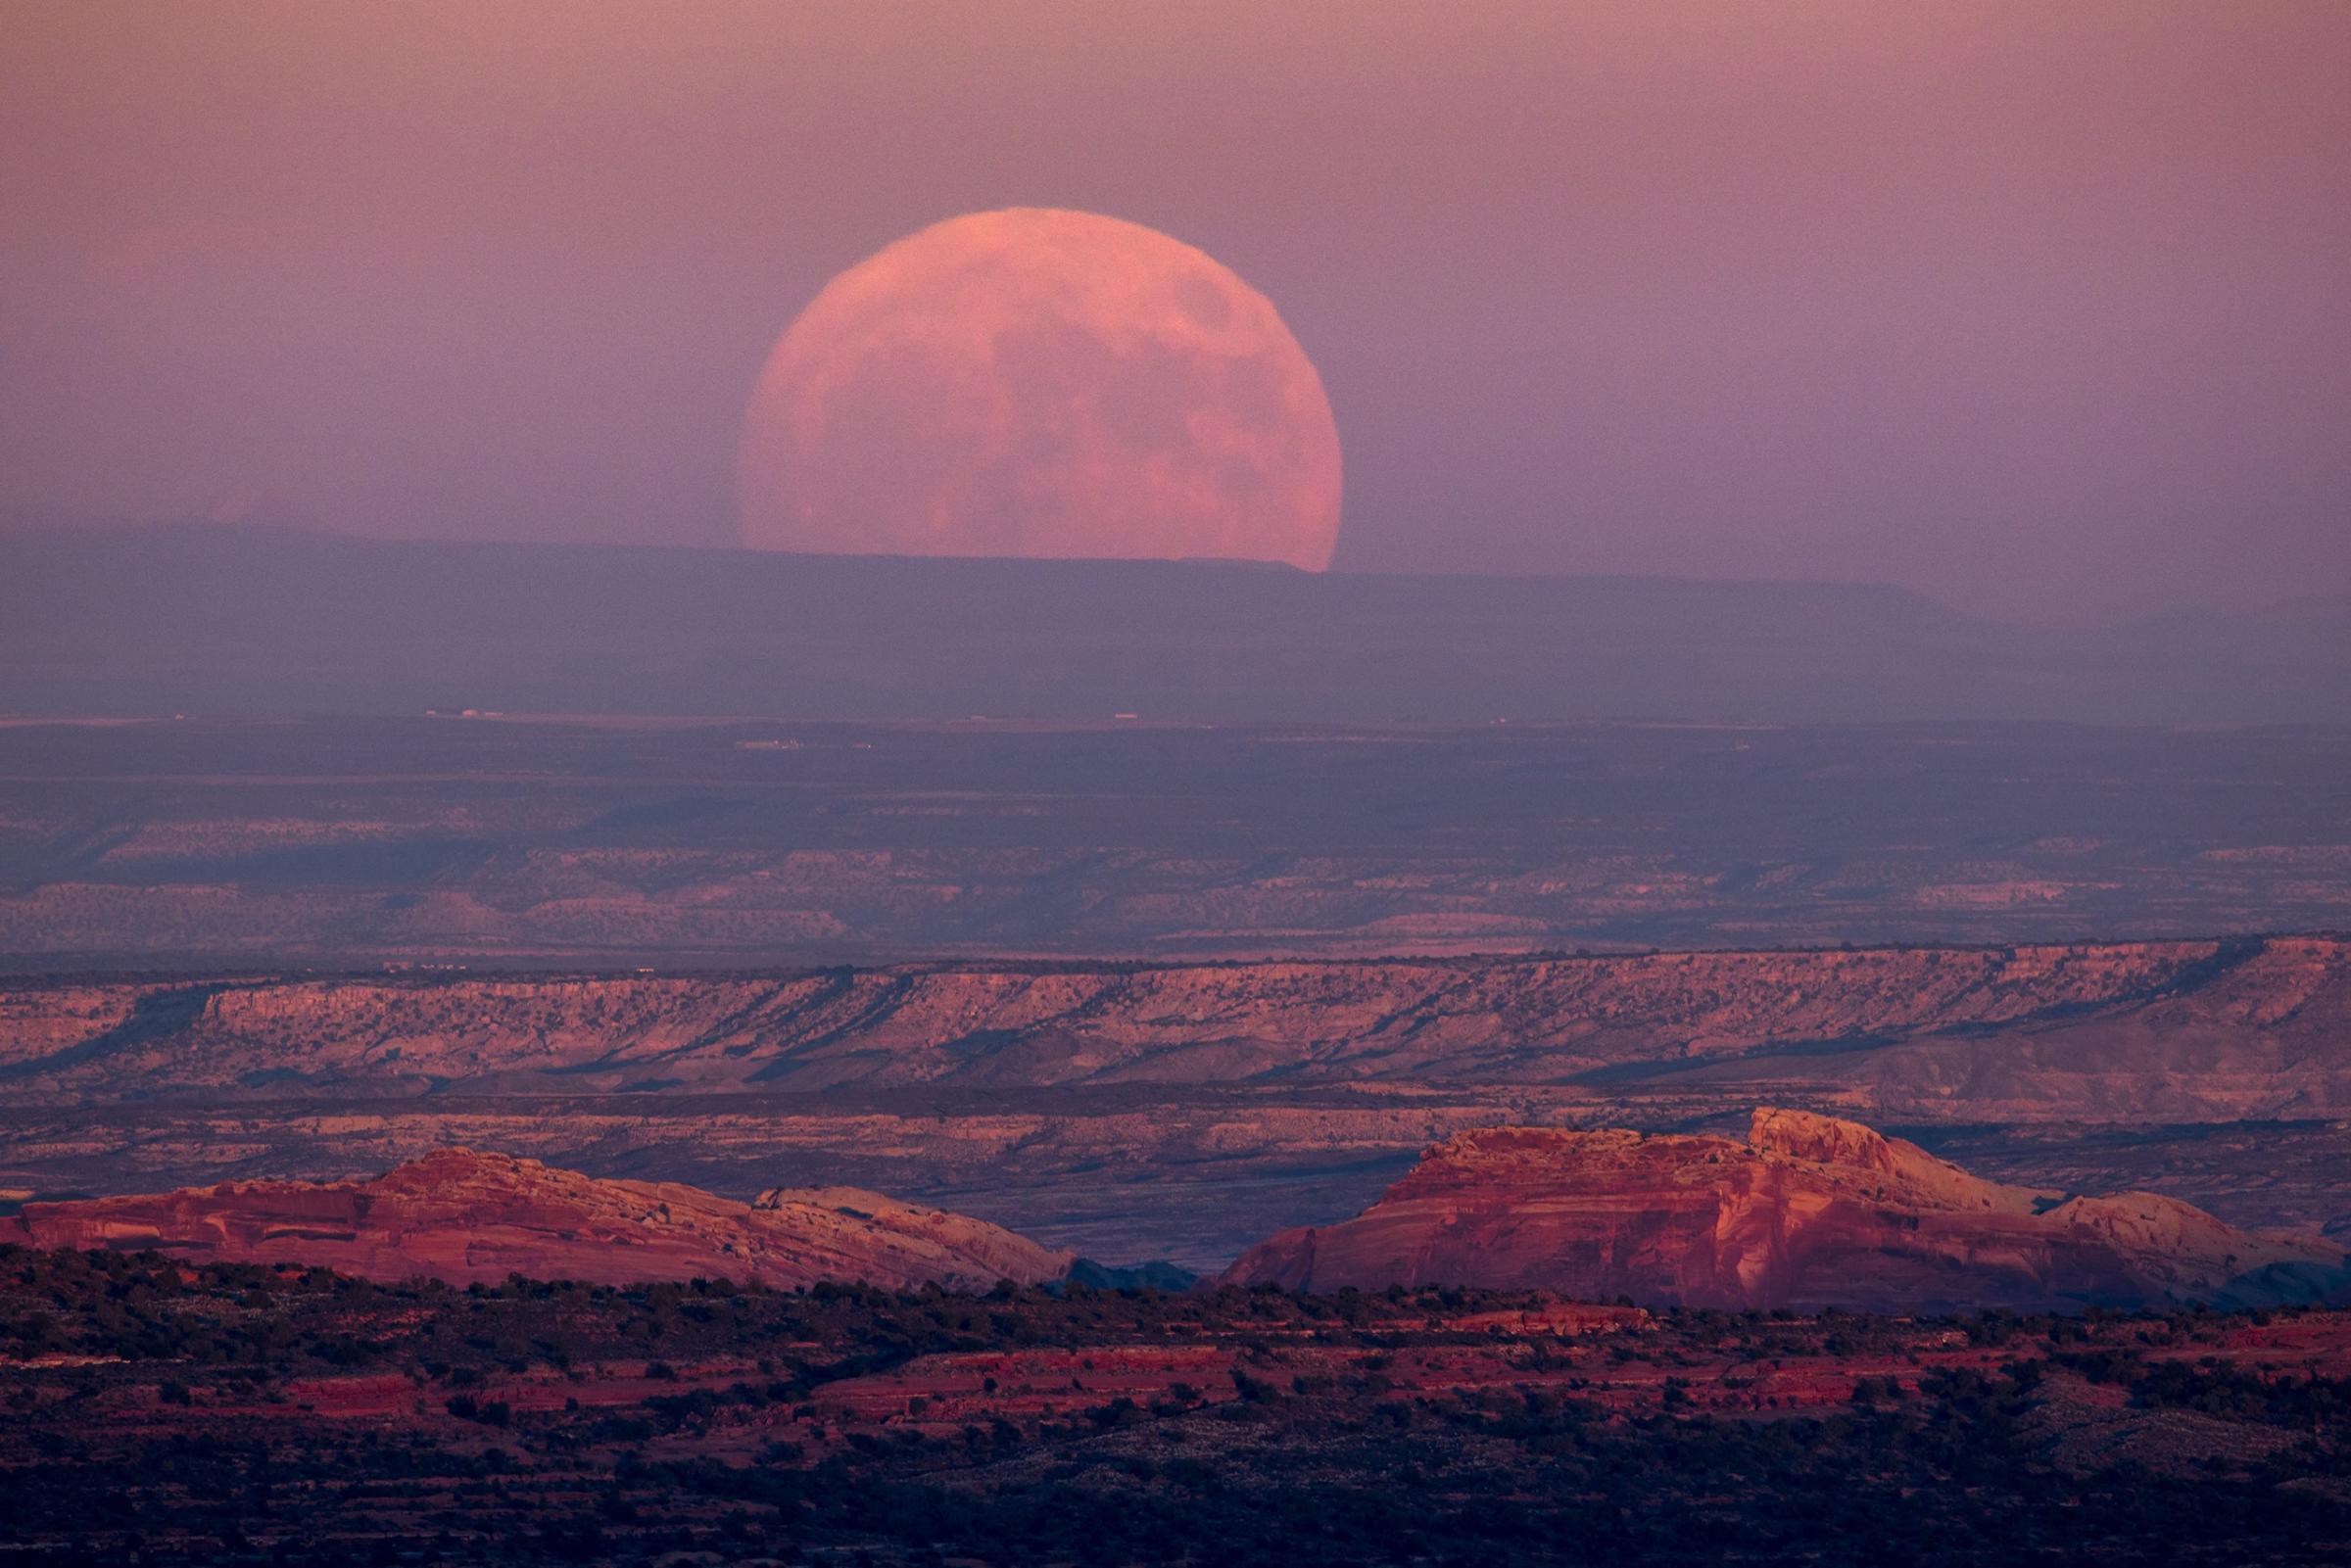 A nearly full moon rises above the Valley of the Gods near Mexican Hat, Utah, on Nov. 13, 2016.